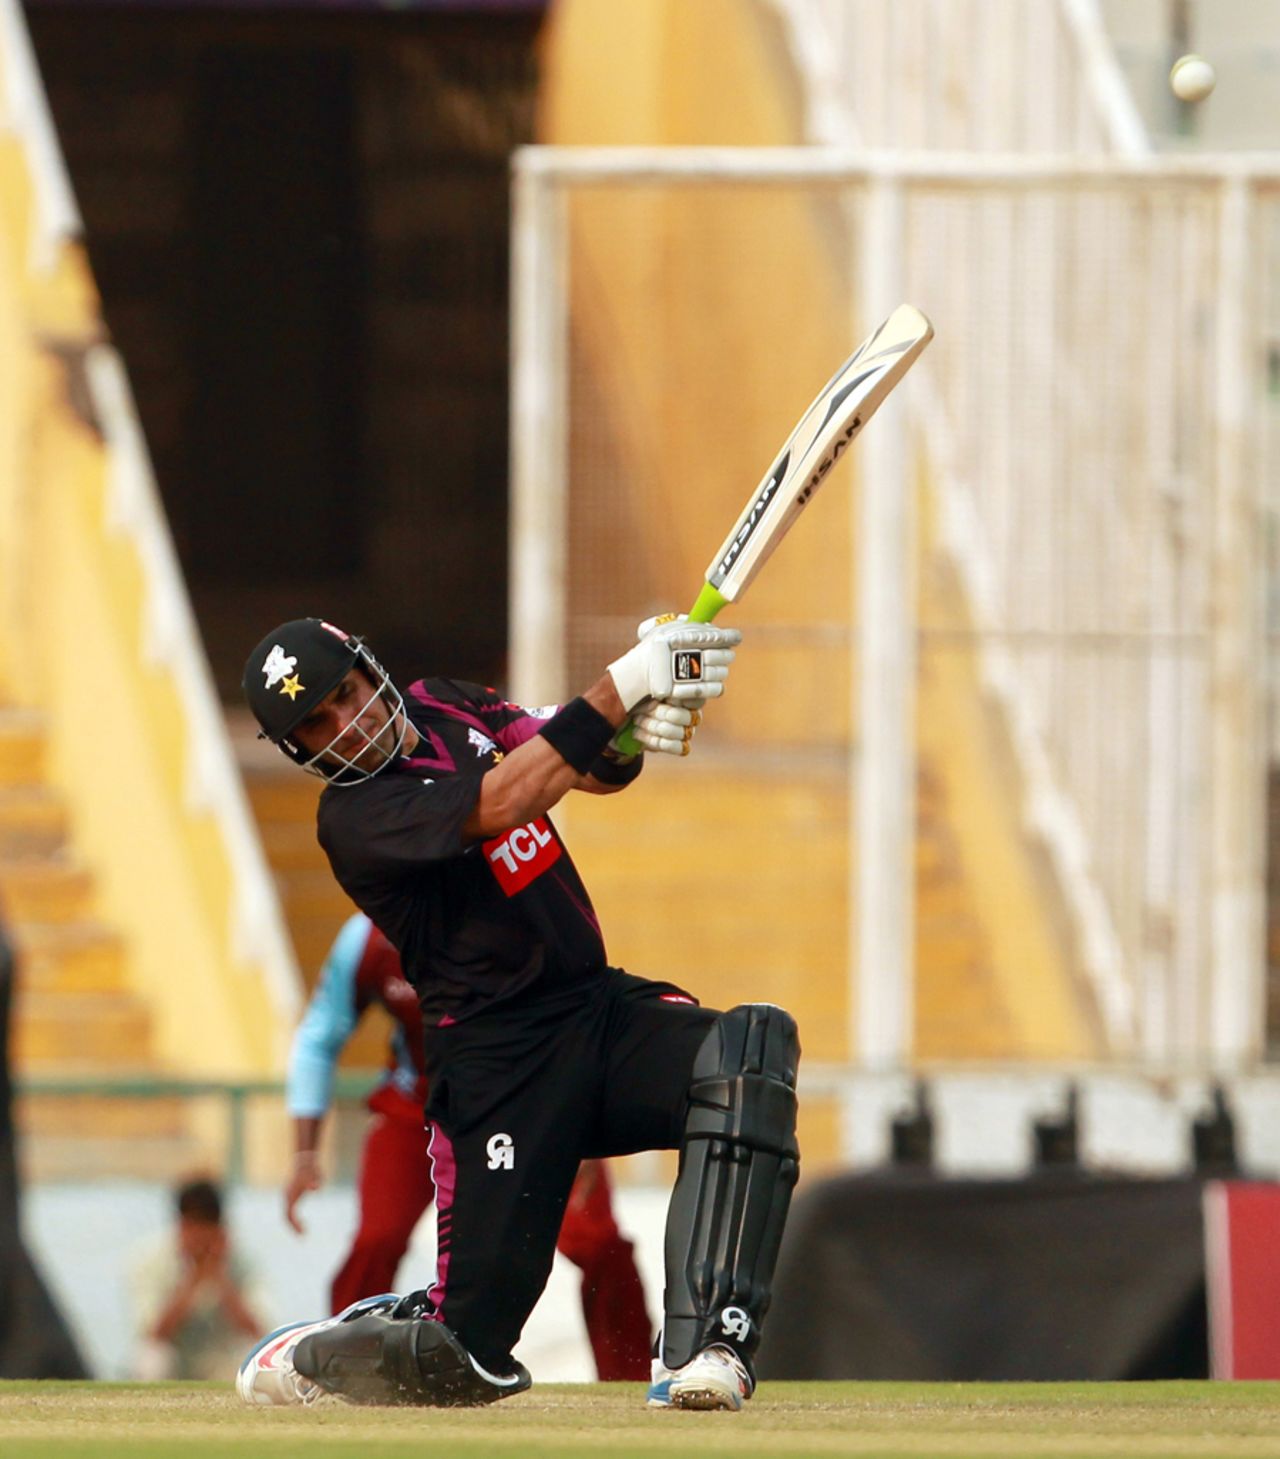 Misbah-ul-Haq lofts a six on his way to a half-century, Faisalabad Wolves v Kandurata Maroons, Champions League Qualifiers, Mohali, September 20, 2013